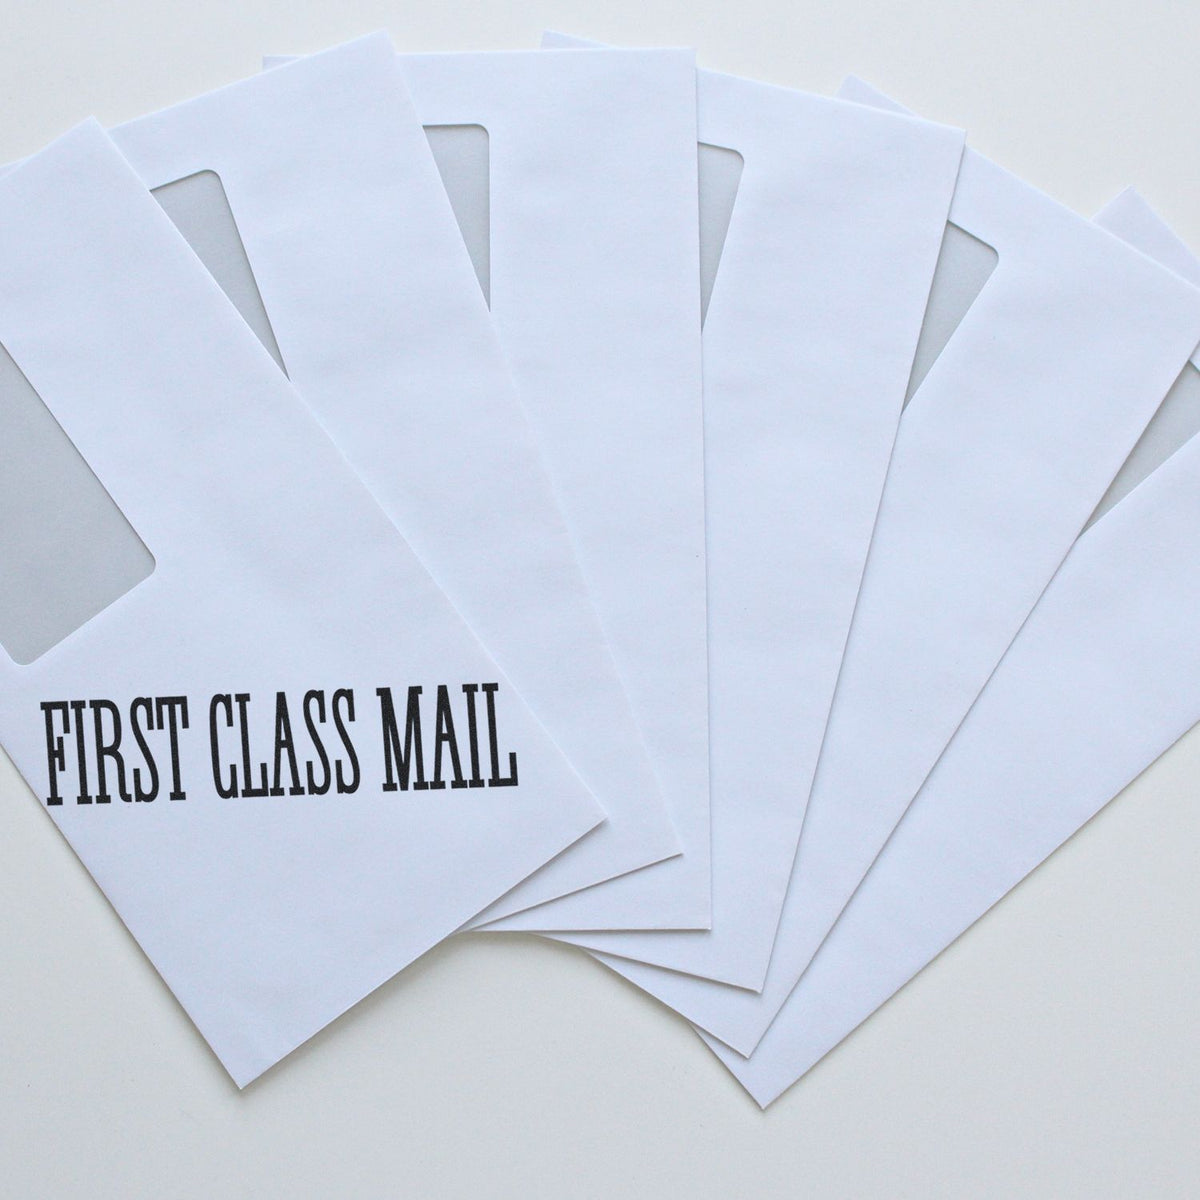 Self-Inking Times First Class Mail Stamp Lifestyle Photo